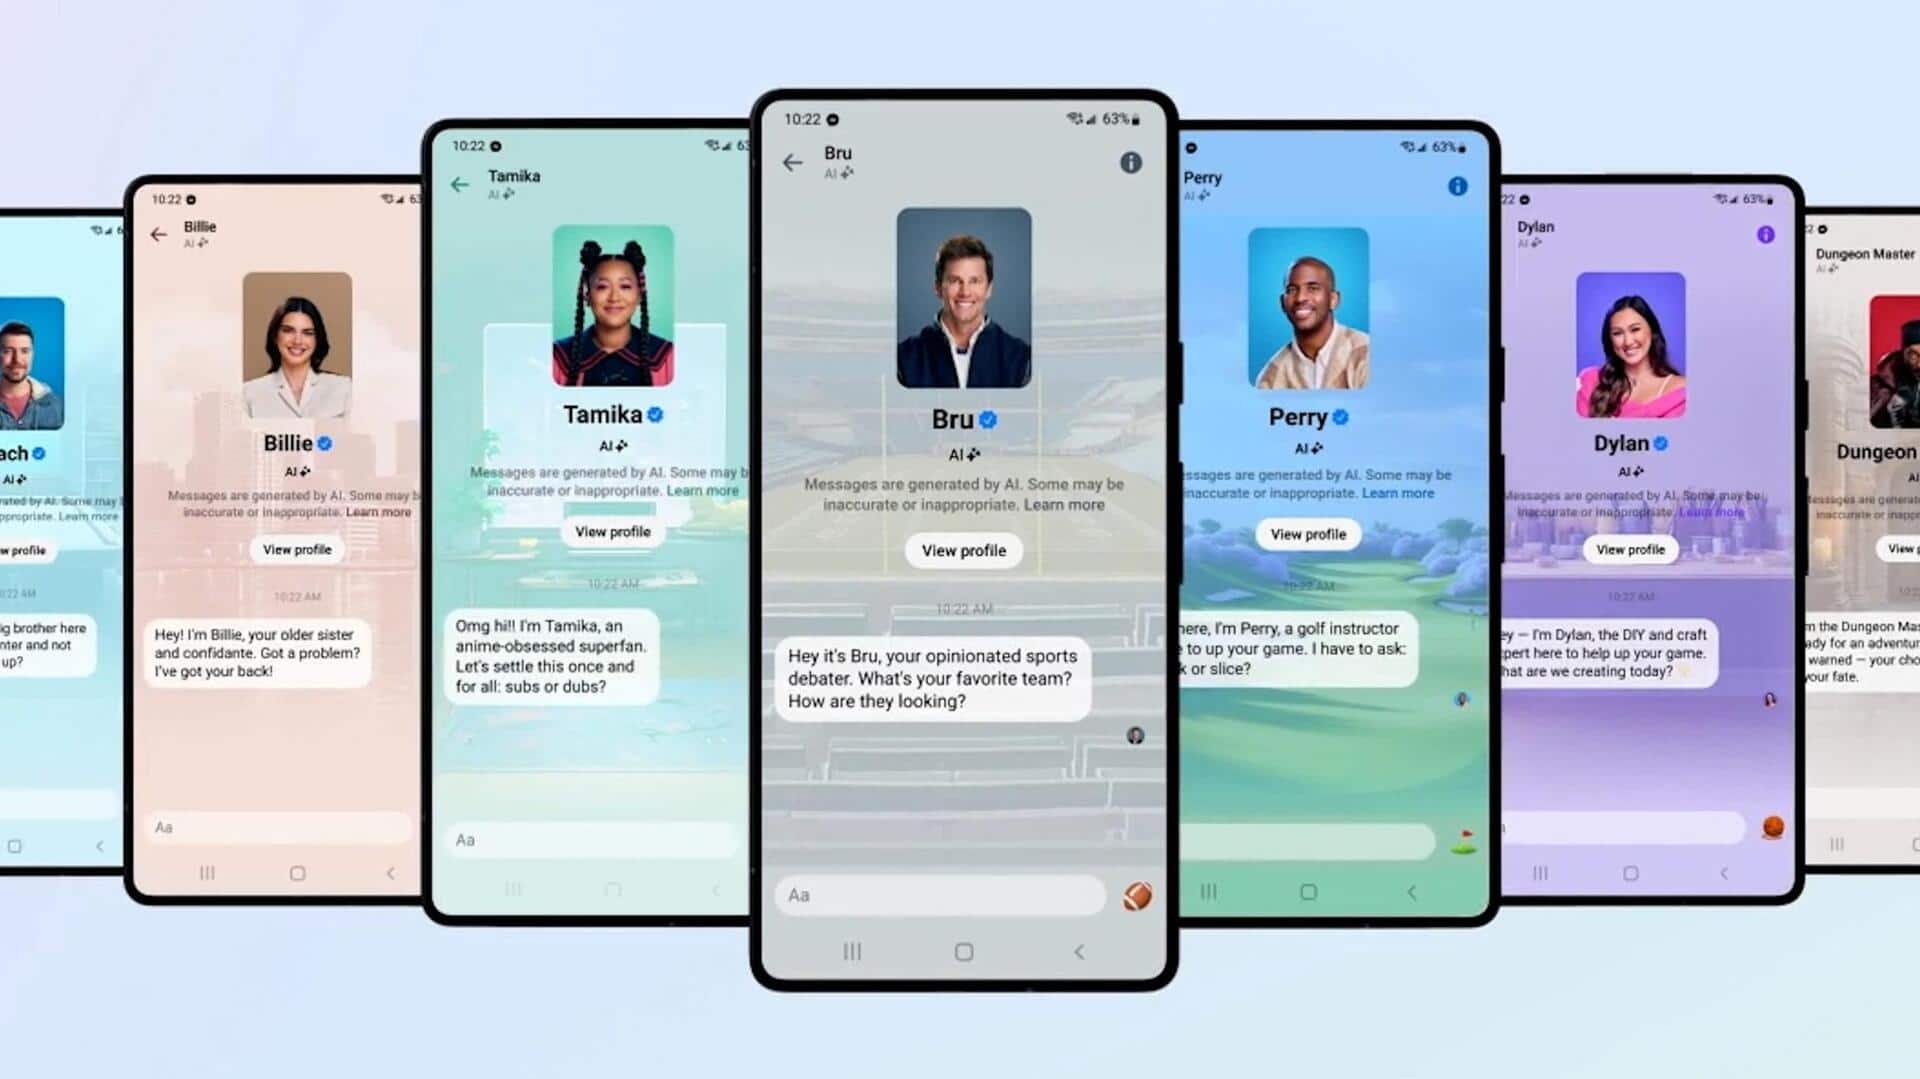 Meta's AI chat feature on Instagram raises privacy concerns